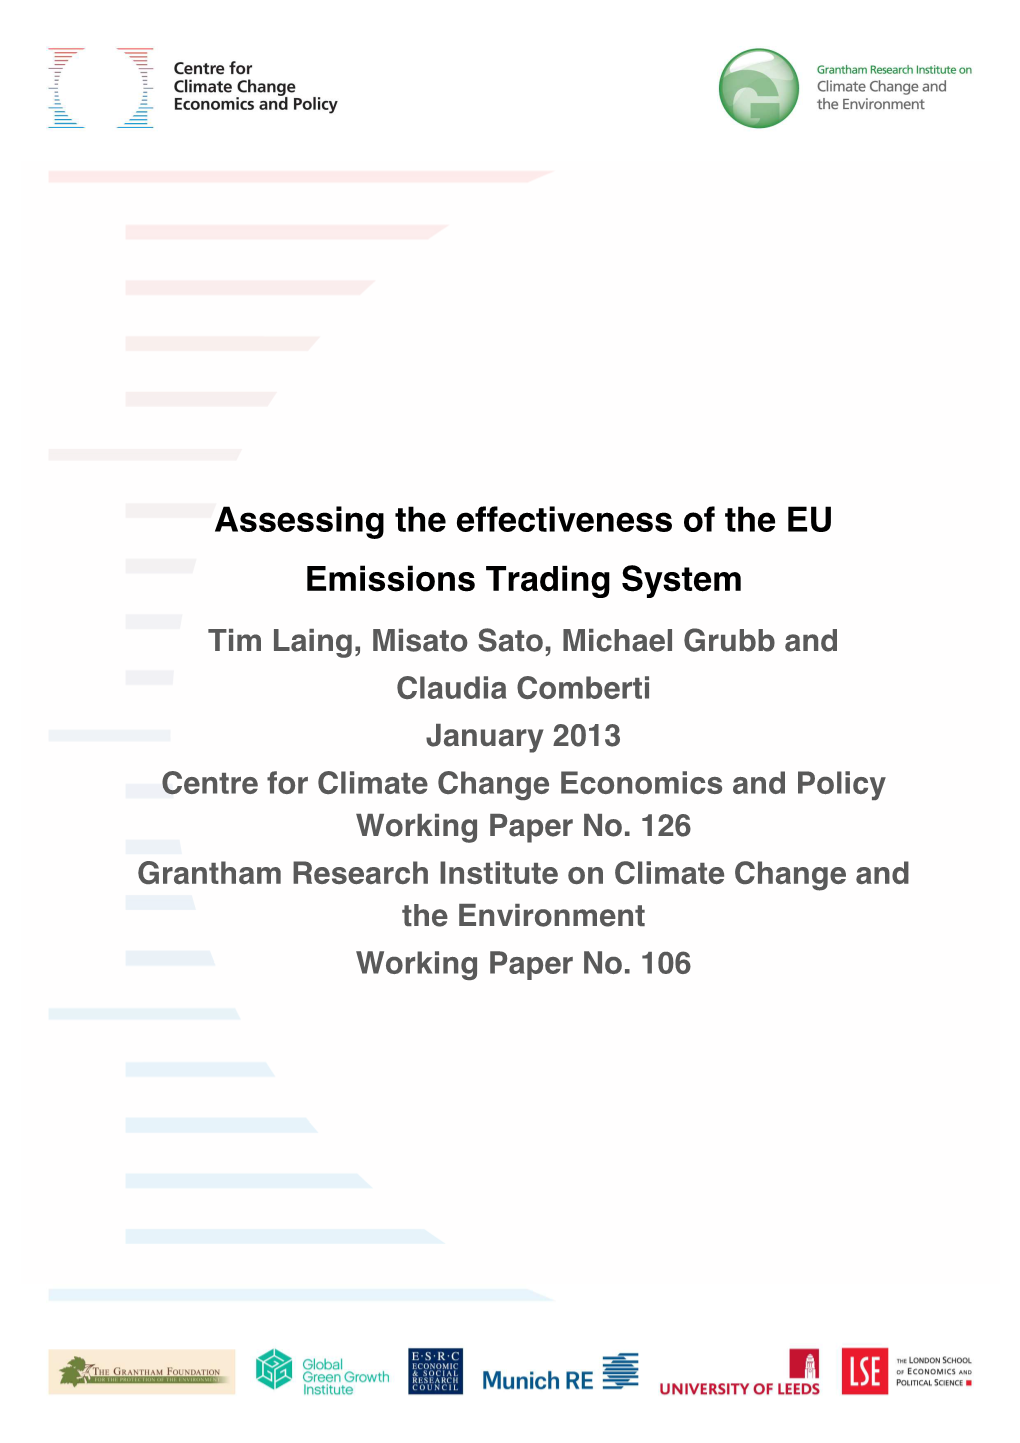 Assessing the Effectiveness of the EU Emissions Trading System